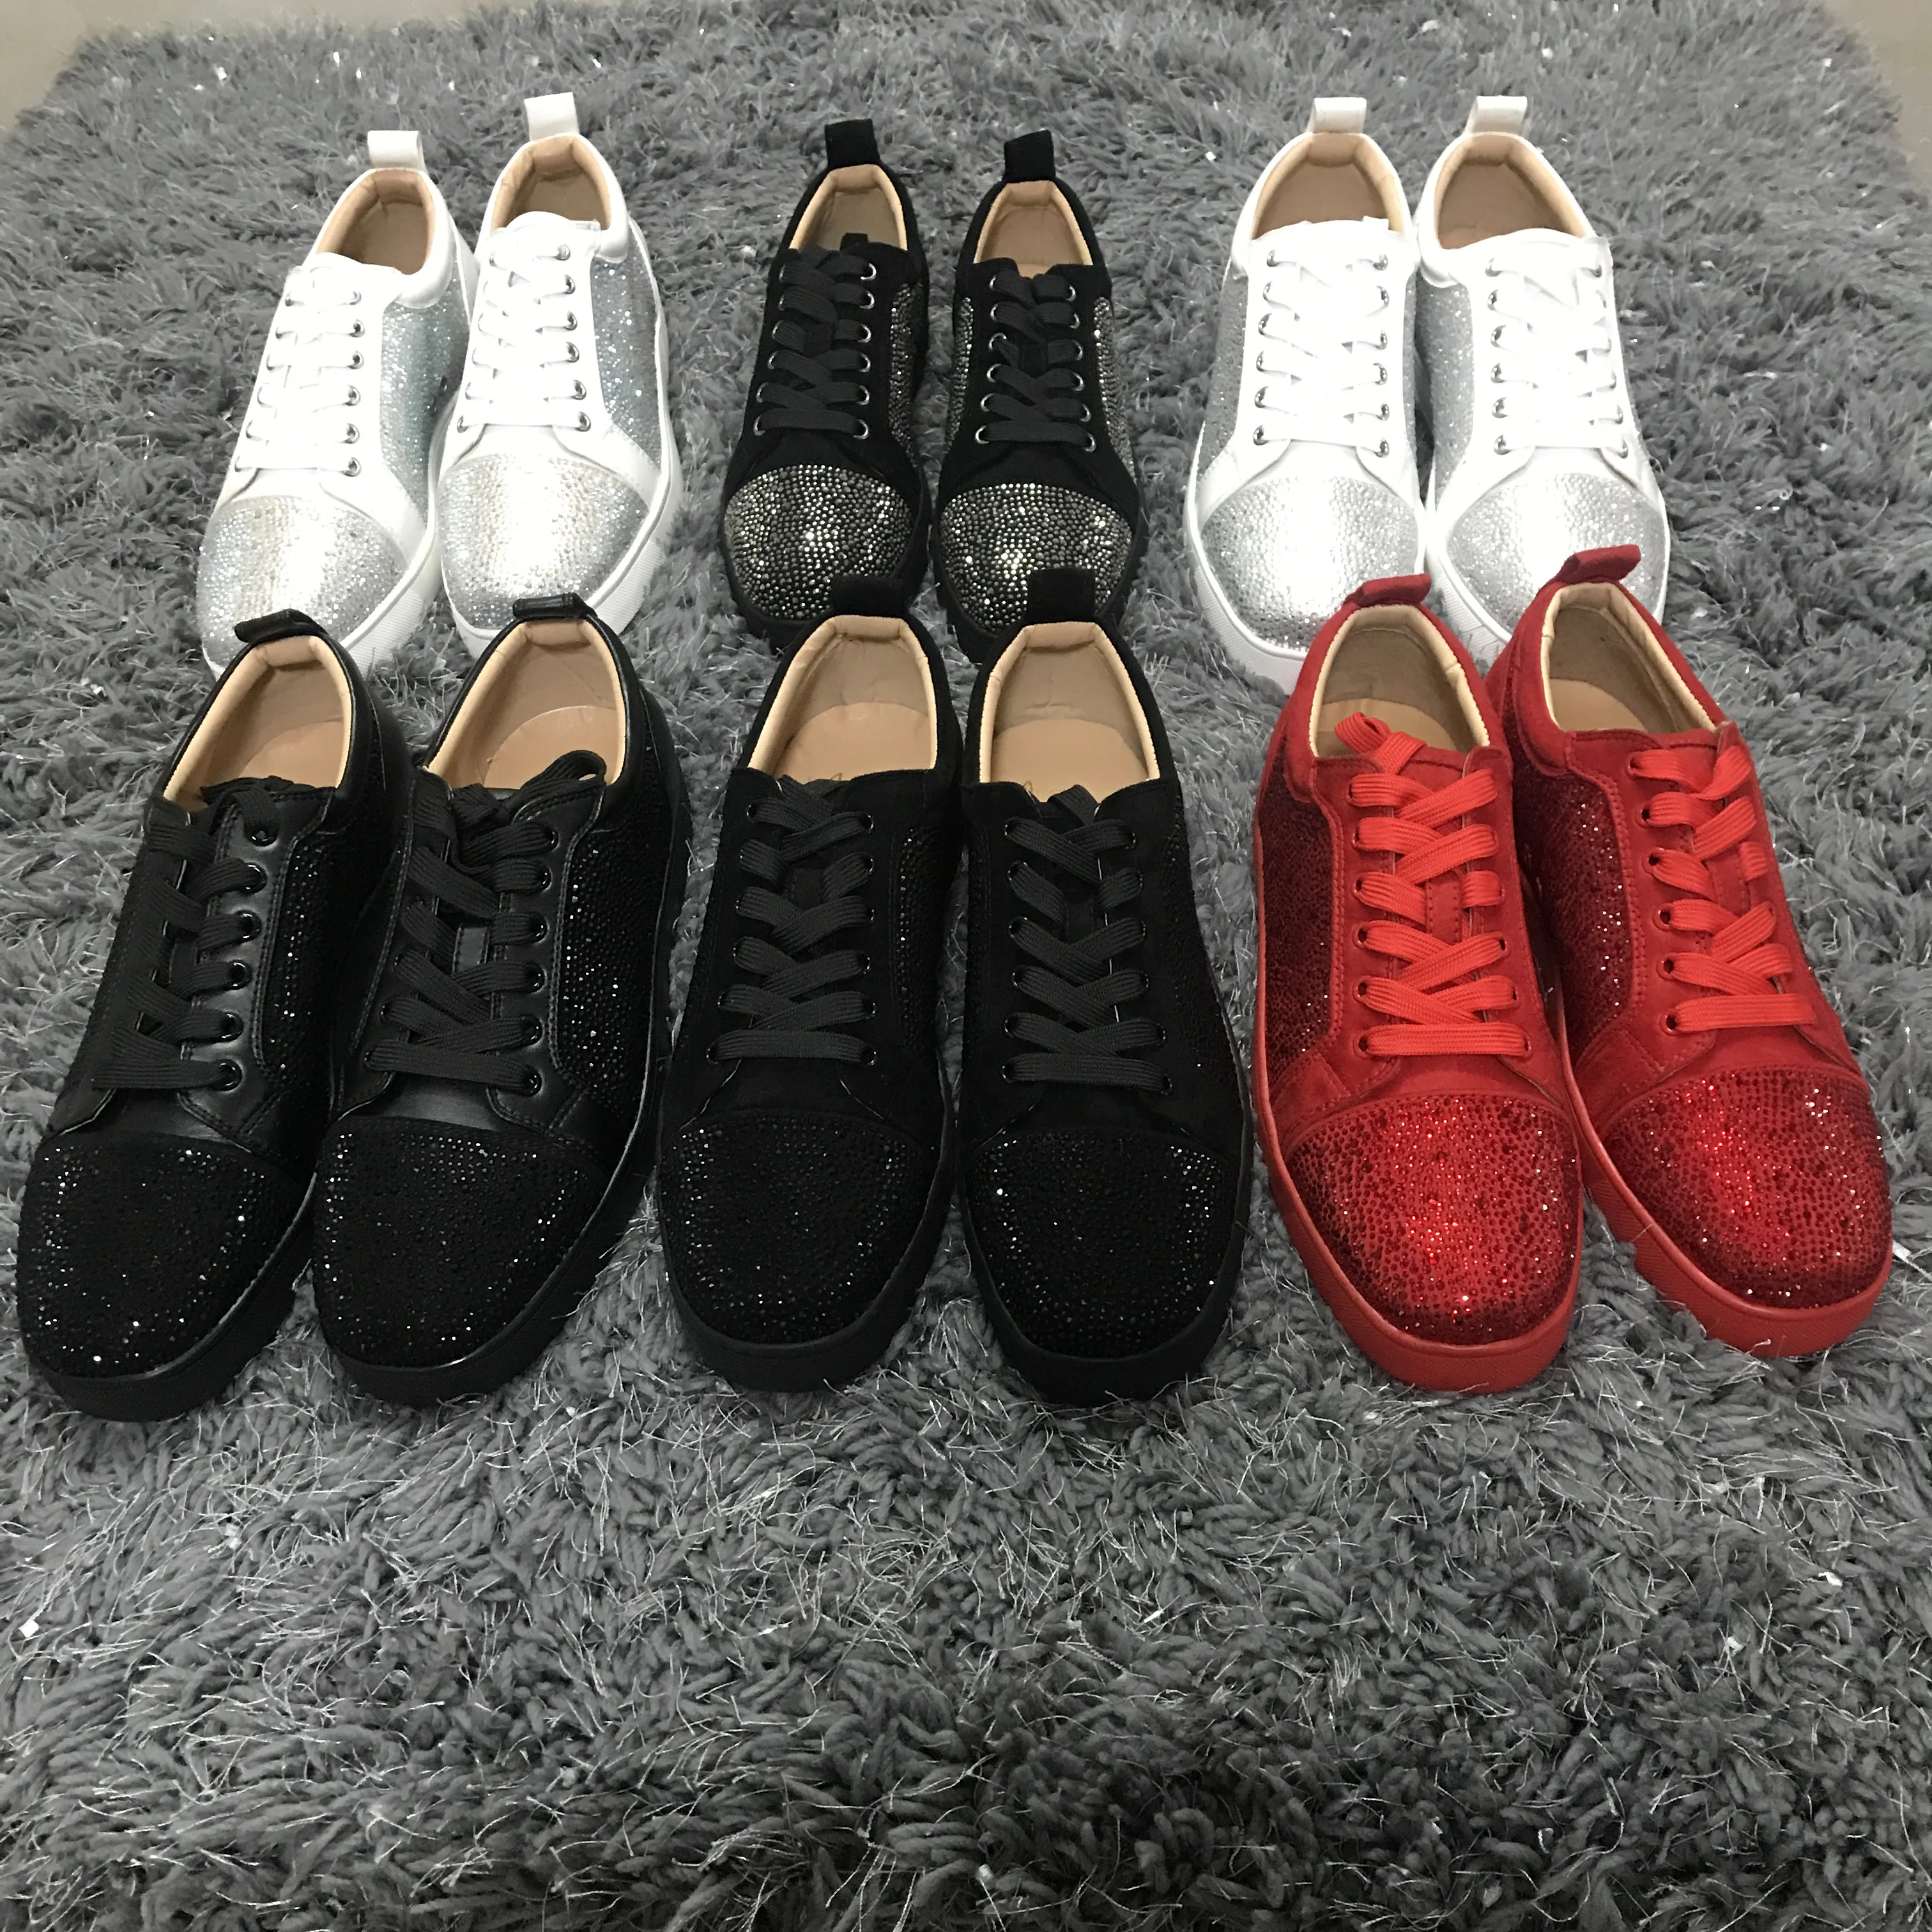 

Wholesale Genuine Leather Rhinestones Brand Red Bottom Men Shoes Famous Brands for Women Luxury Designer Sneakers, Black,red,white